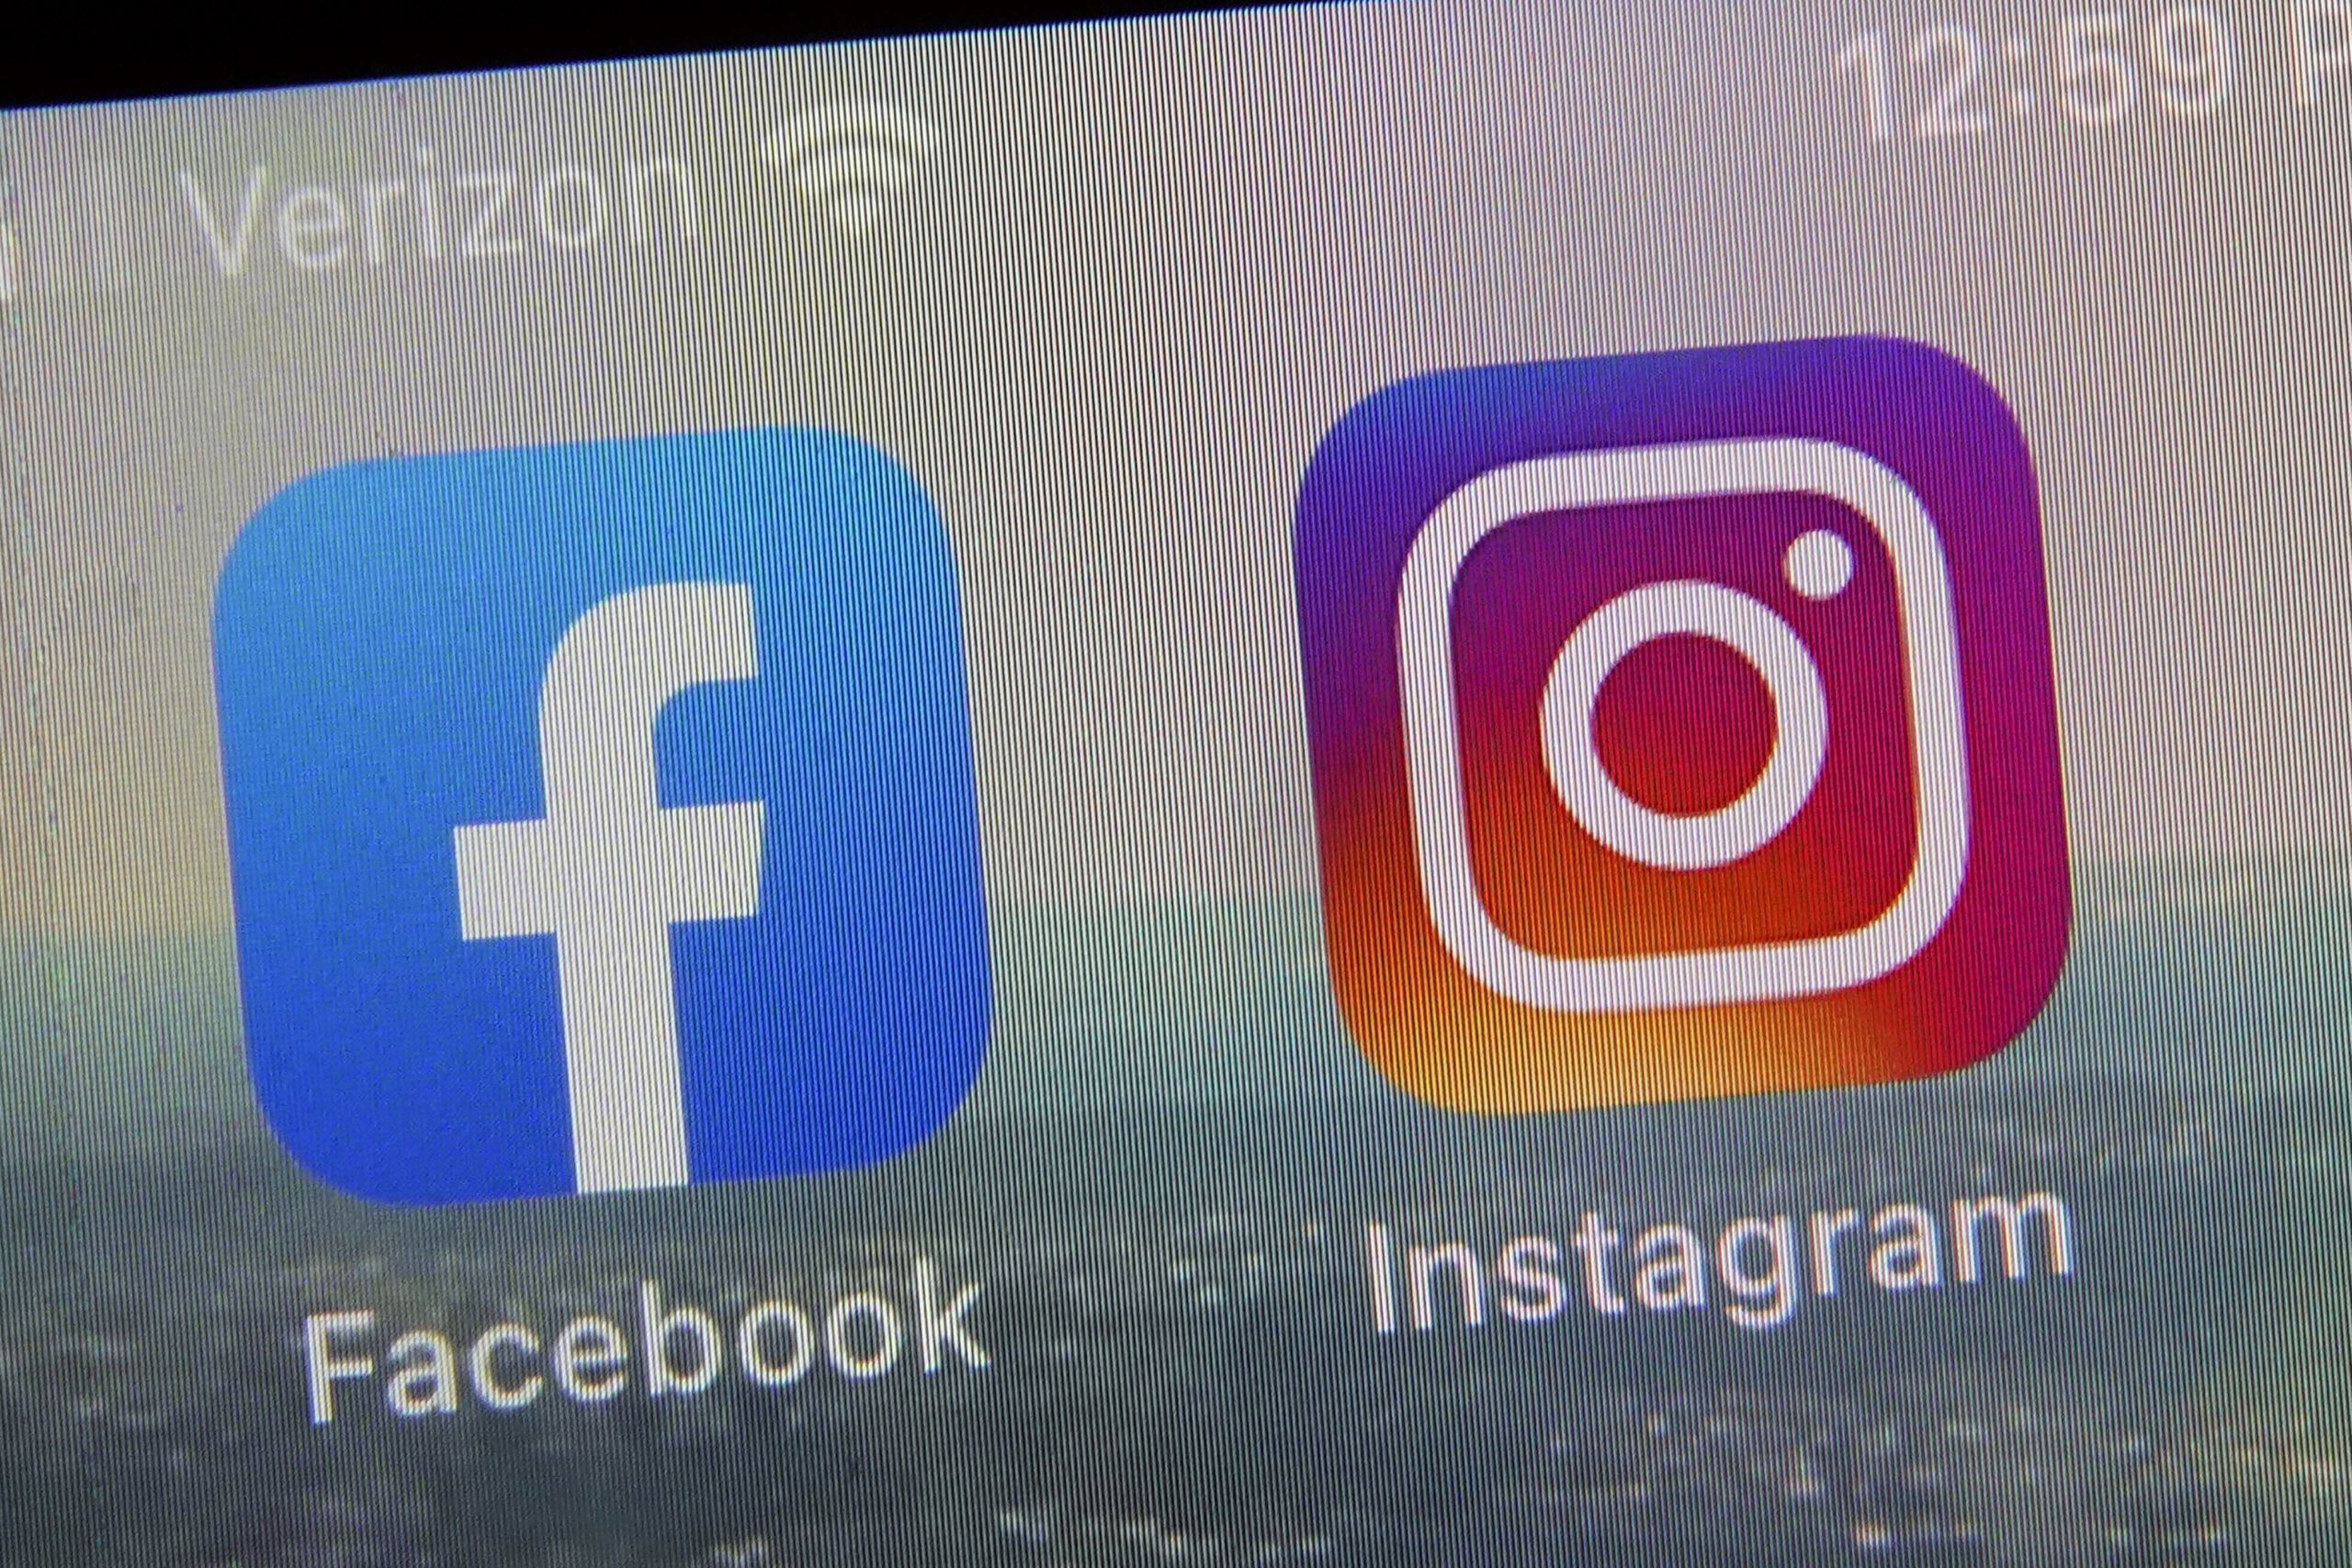 A photo of a phone screen showing the app icons for Facebook and Instagram